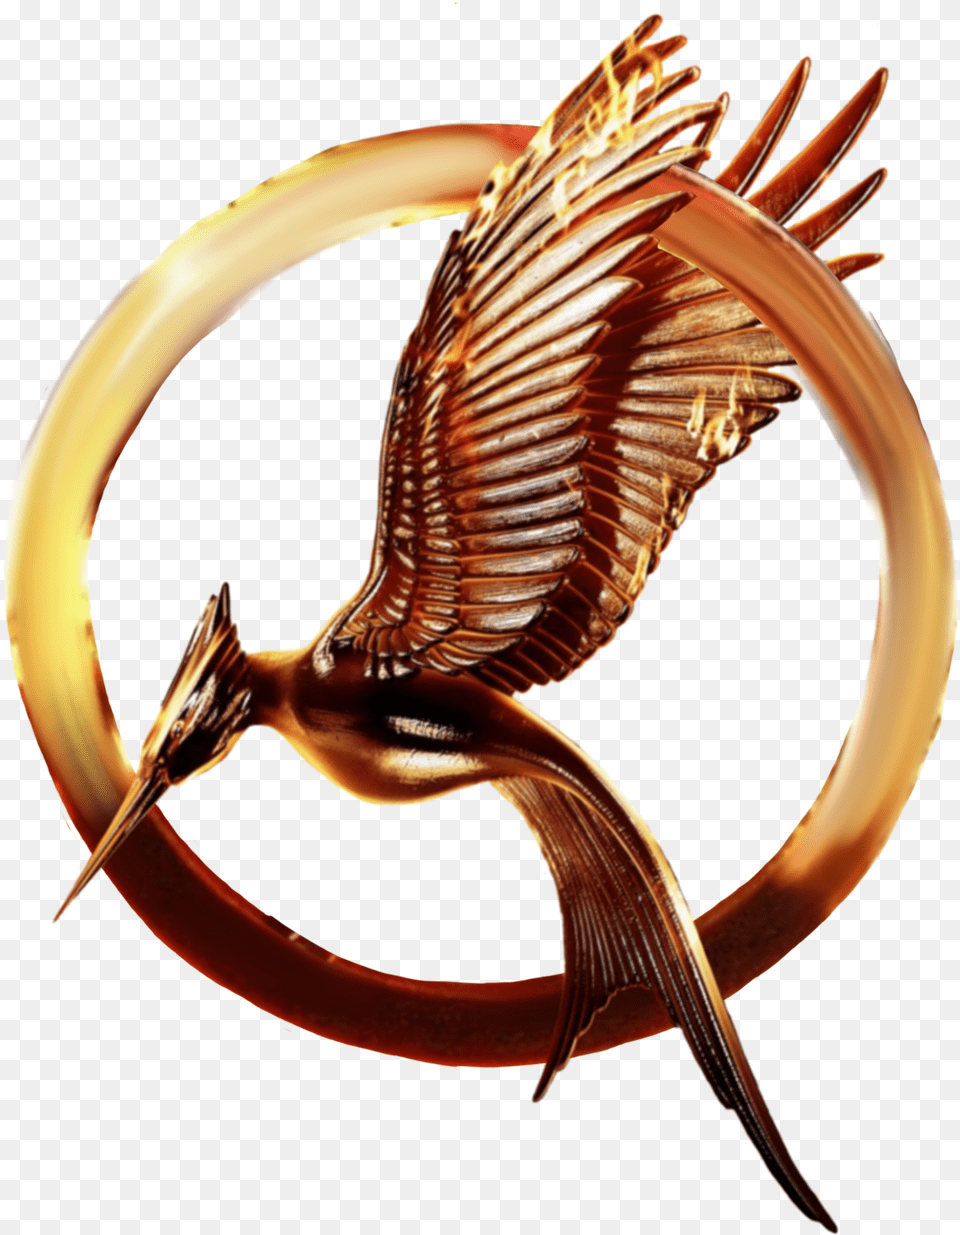 Catching Fire Mockingjay The Hunger Hunger Games Catching Fire Pin, Bronze, Animal, Fish, Sea Life Png